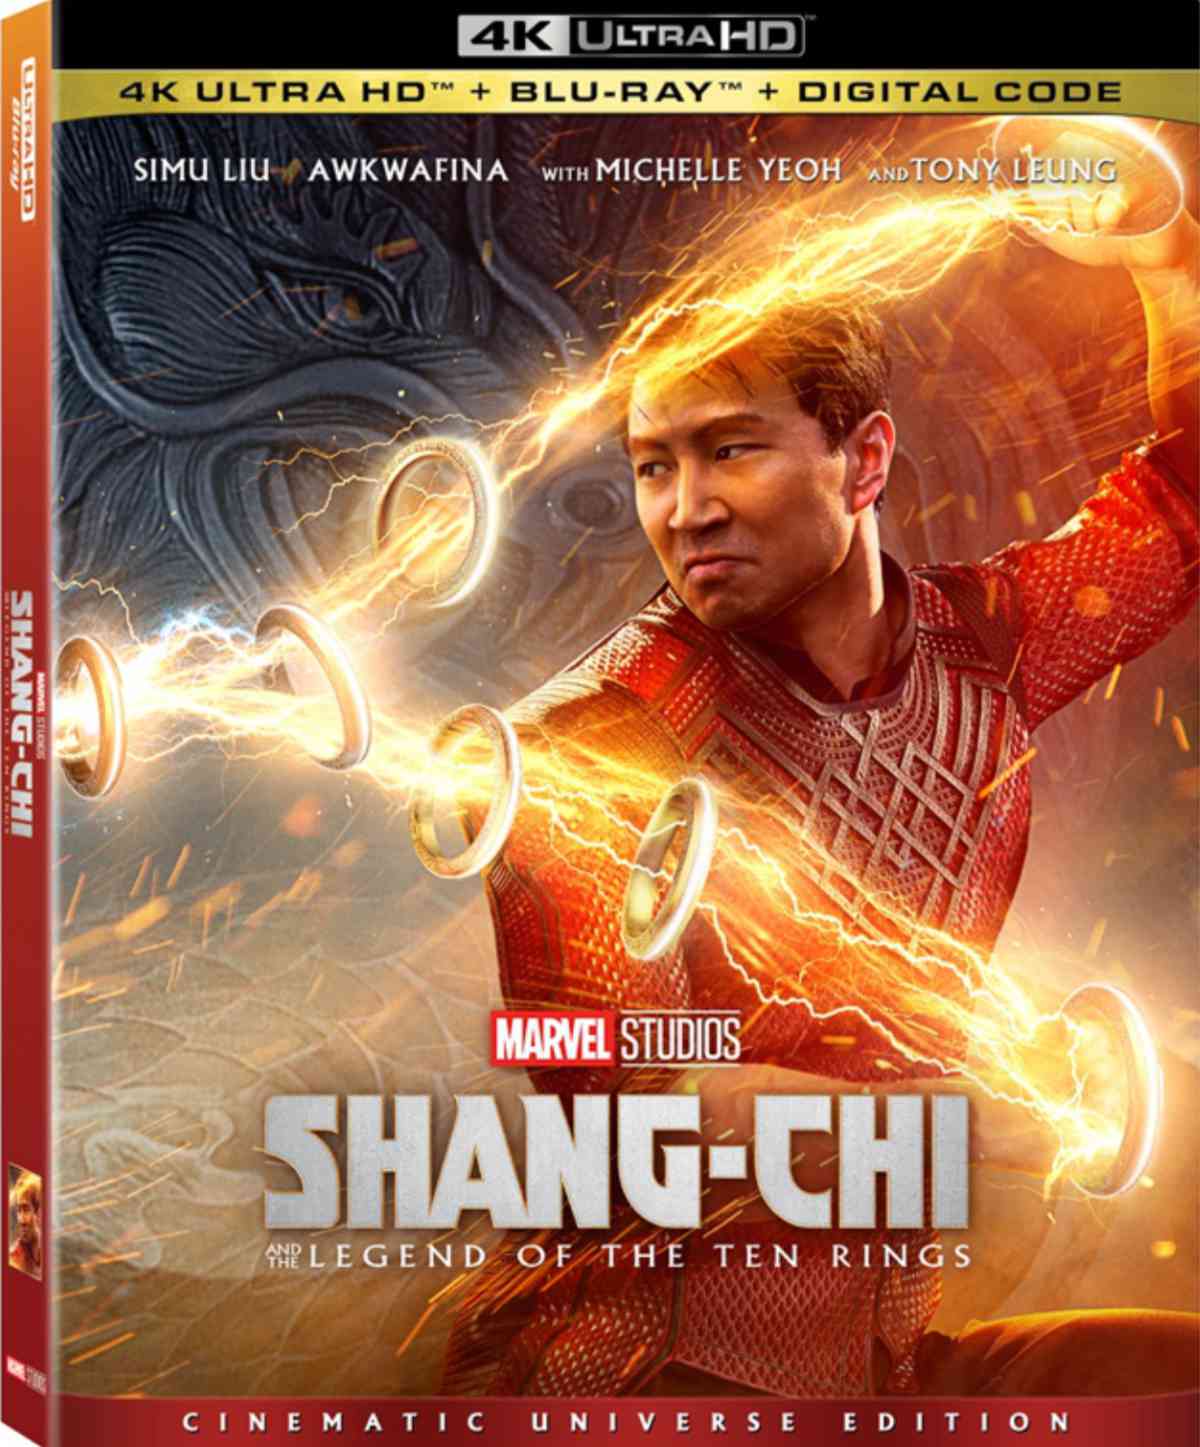 Shang-Chi And The Legend of the Ten Rings (2021) Vudu or Movies Anywhere 4K redemption only